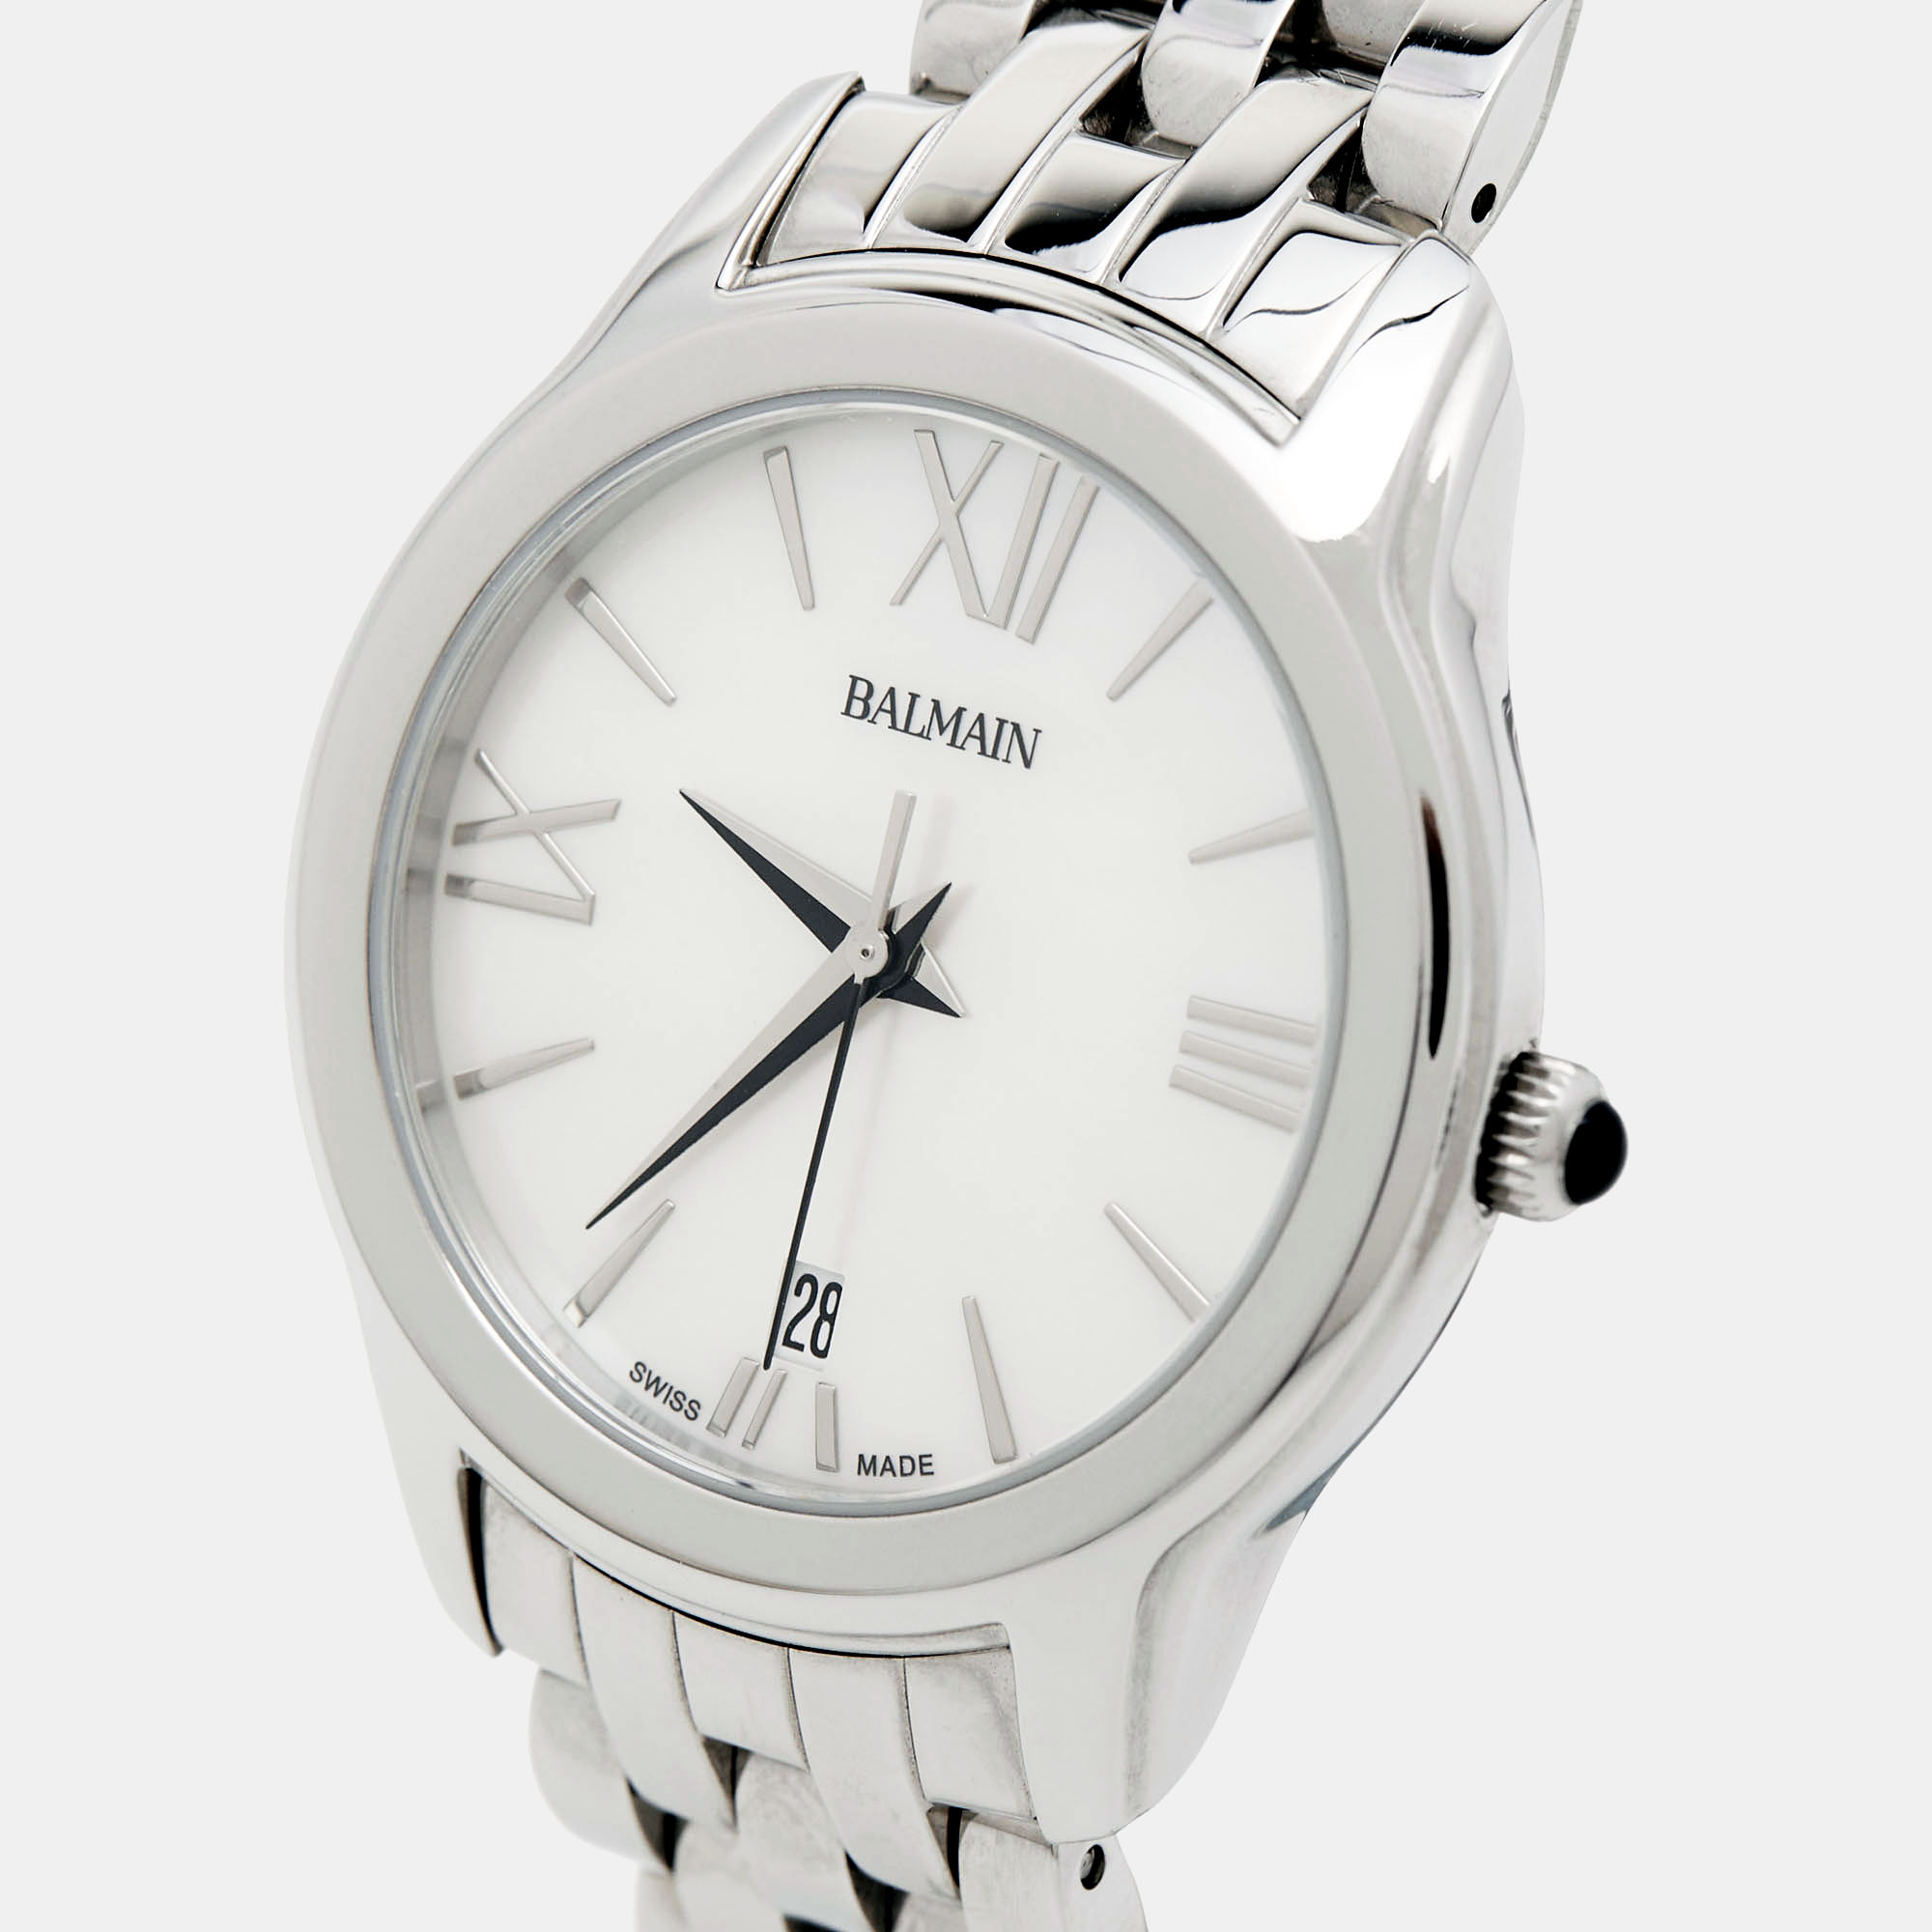 

Balmain Mother of Pearl Stainless Steel Tradition B1891.33.82 Women's Wristwatch, White